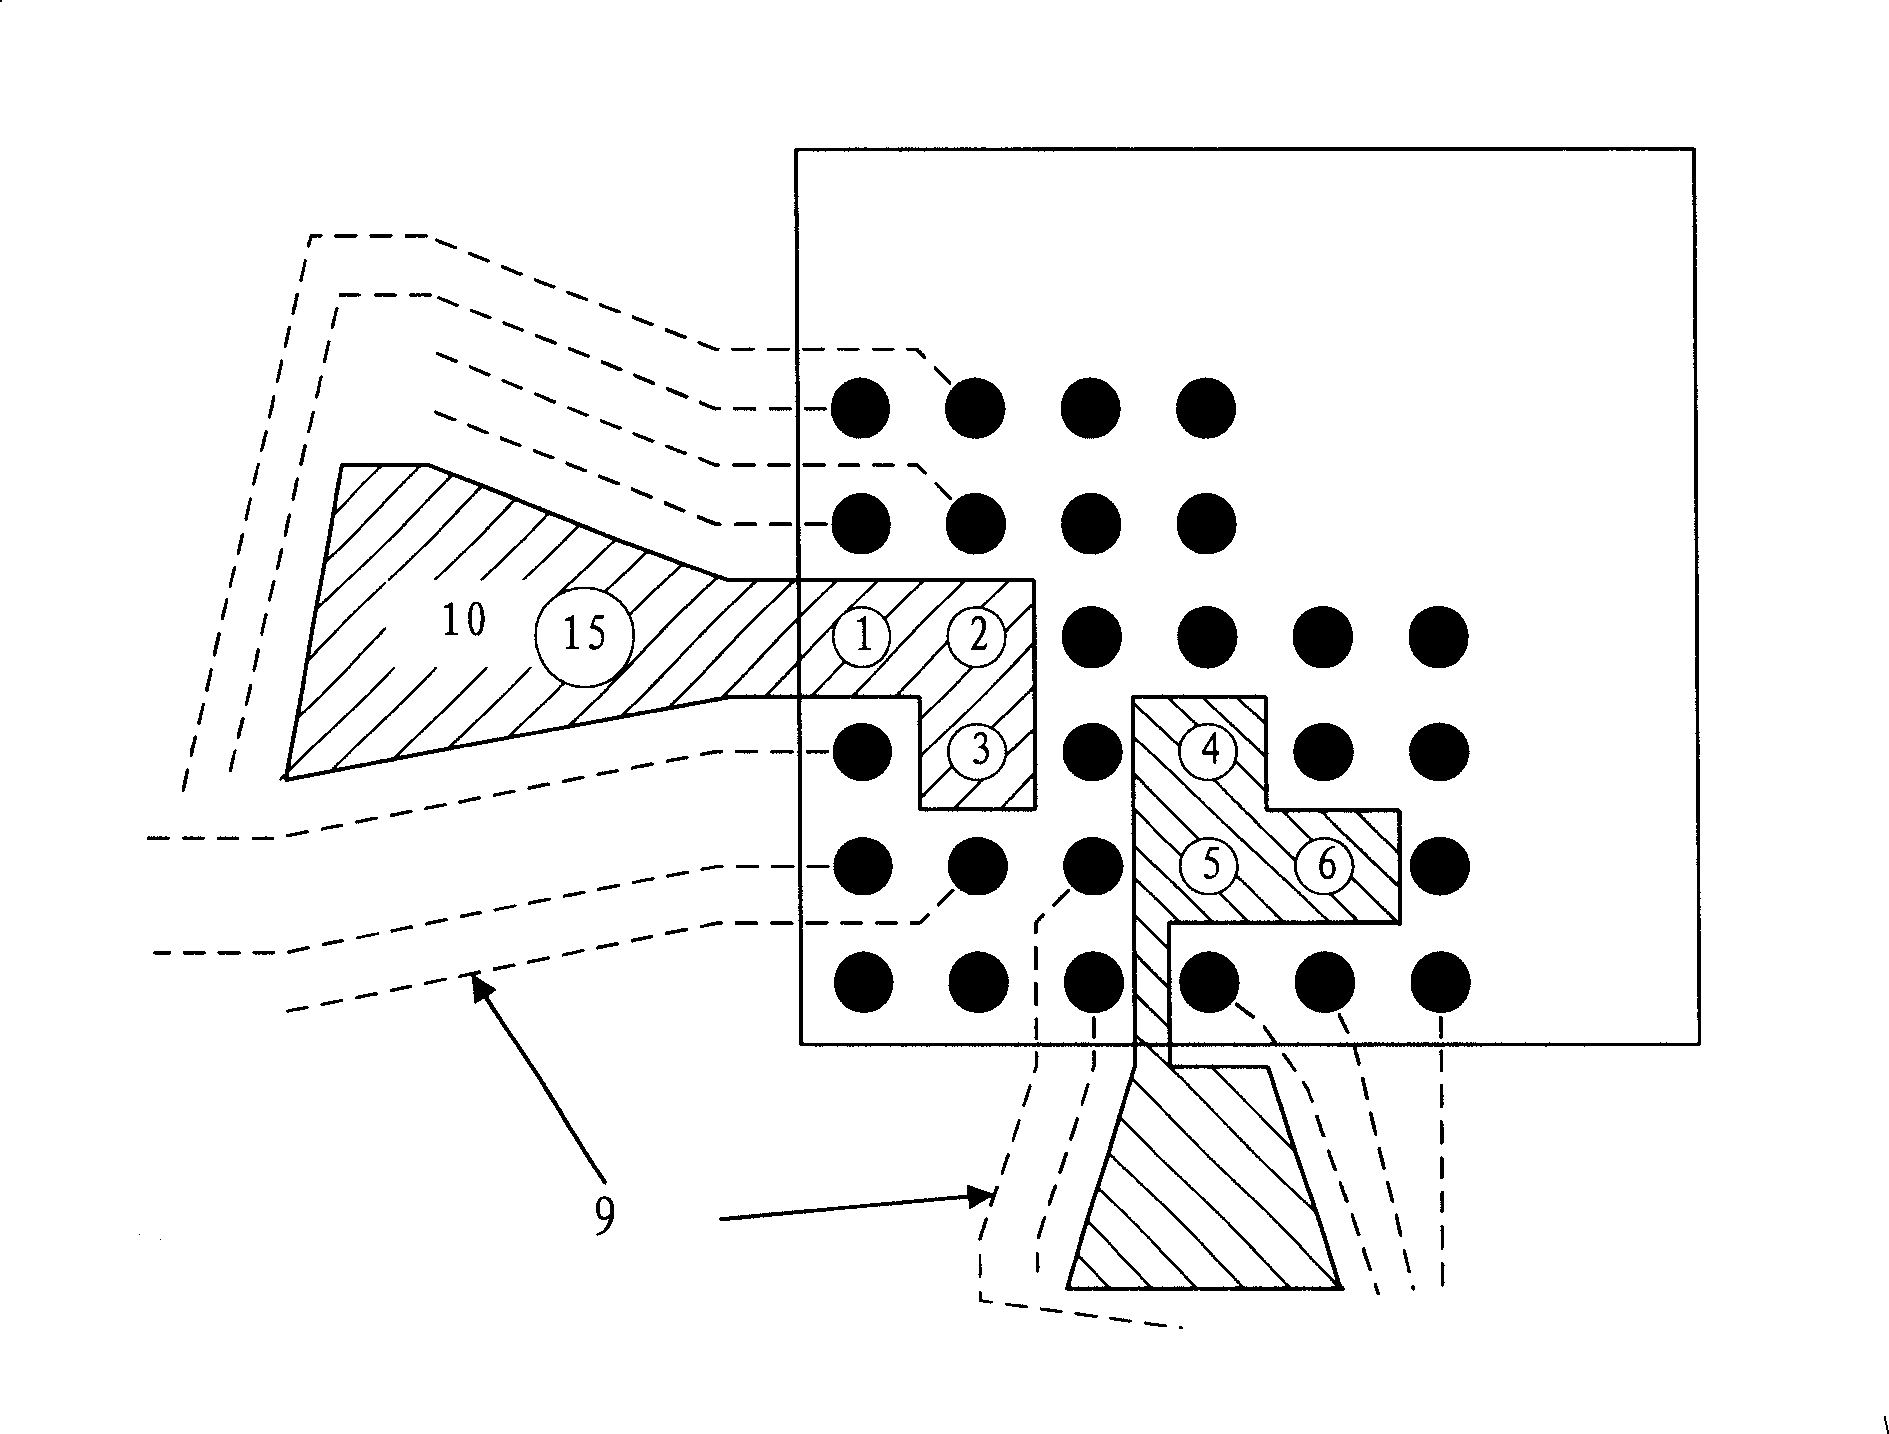 Heat sink for ball single array packaged chip and its application